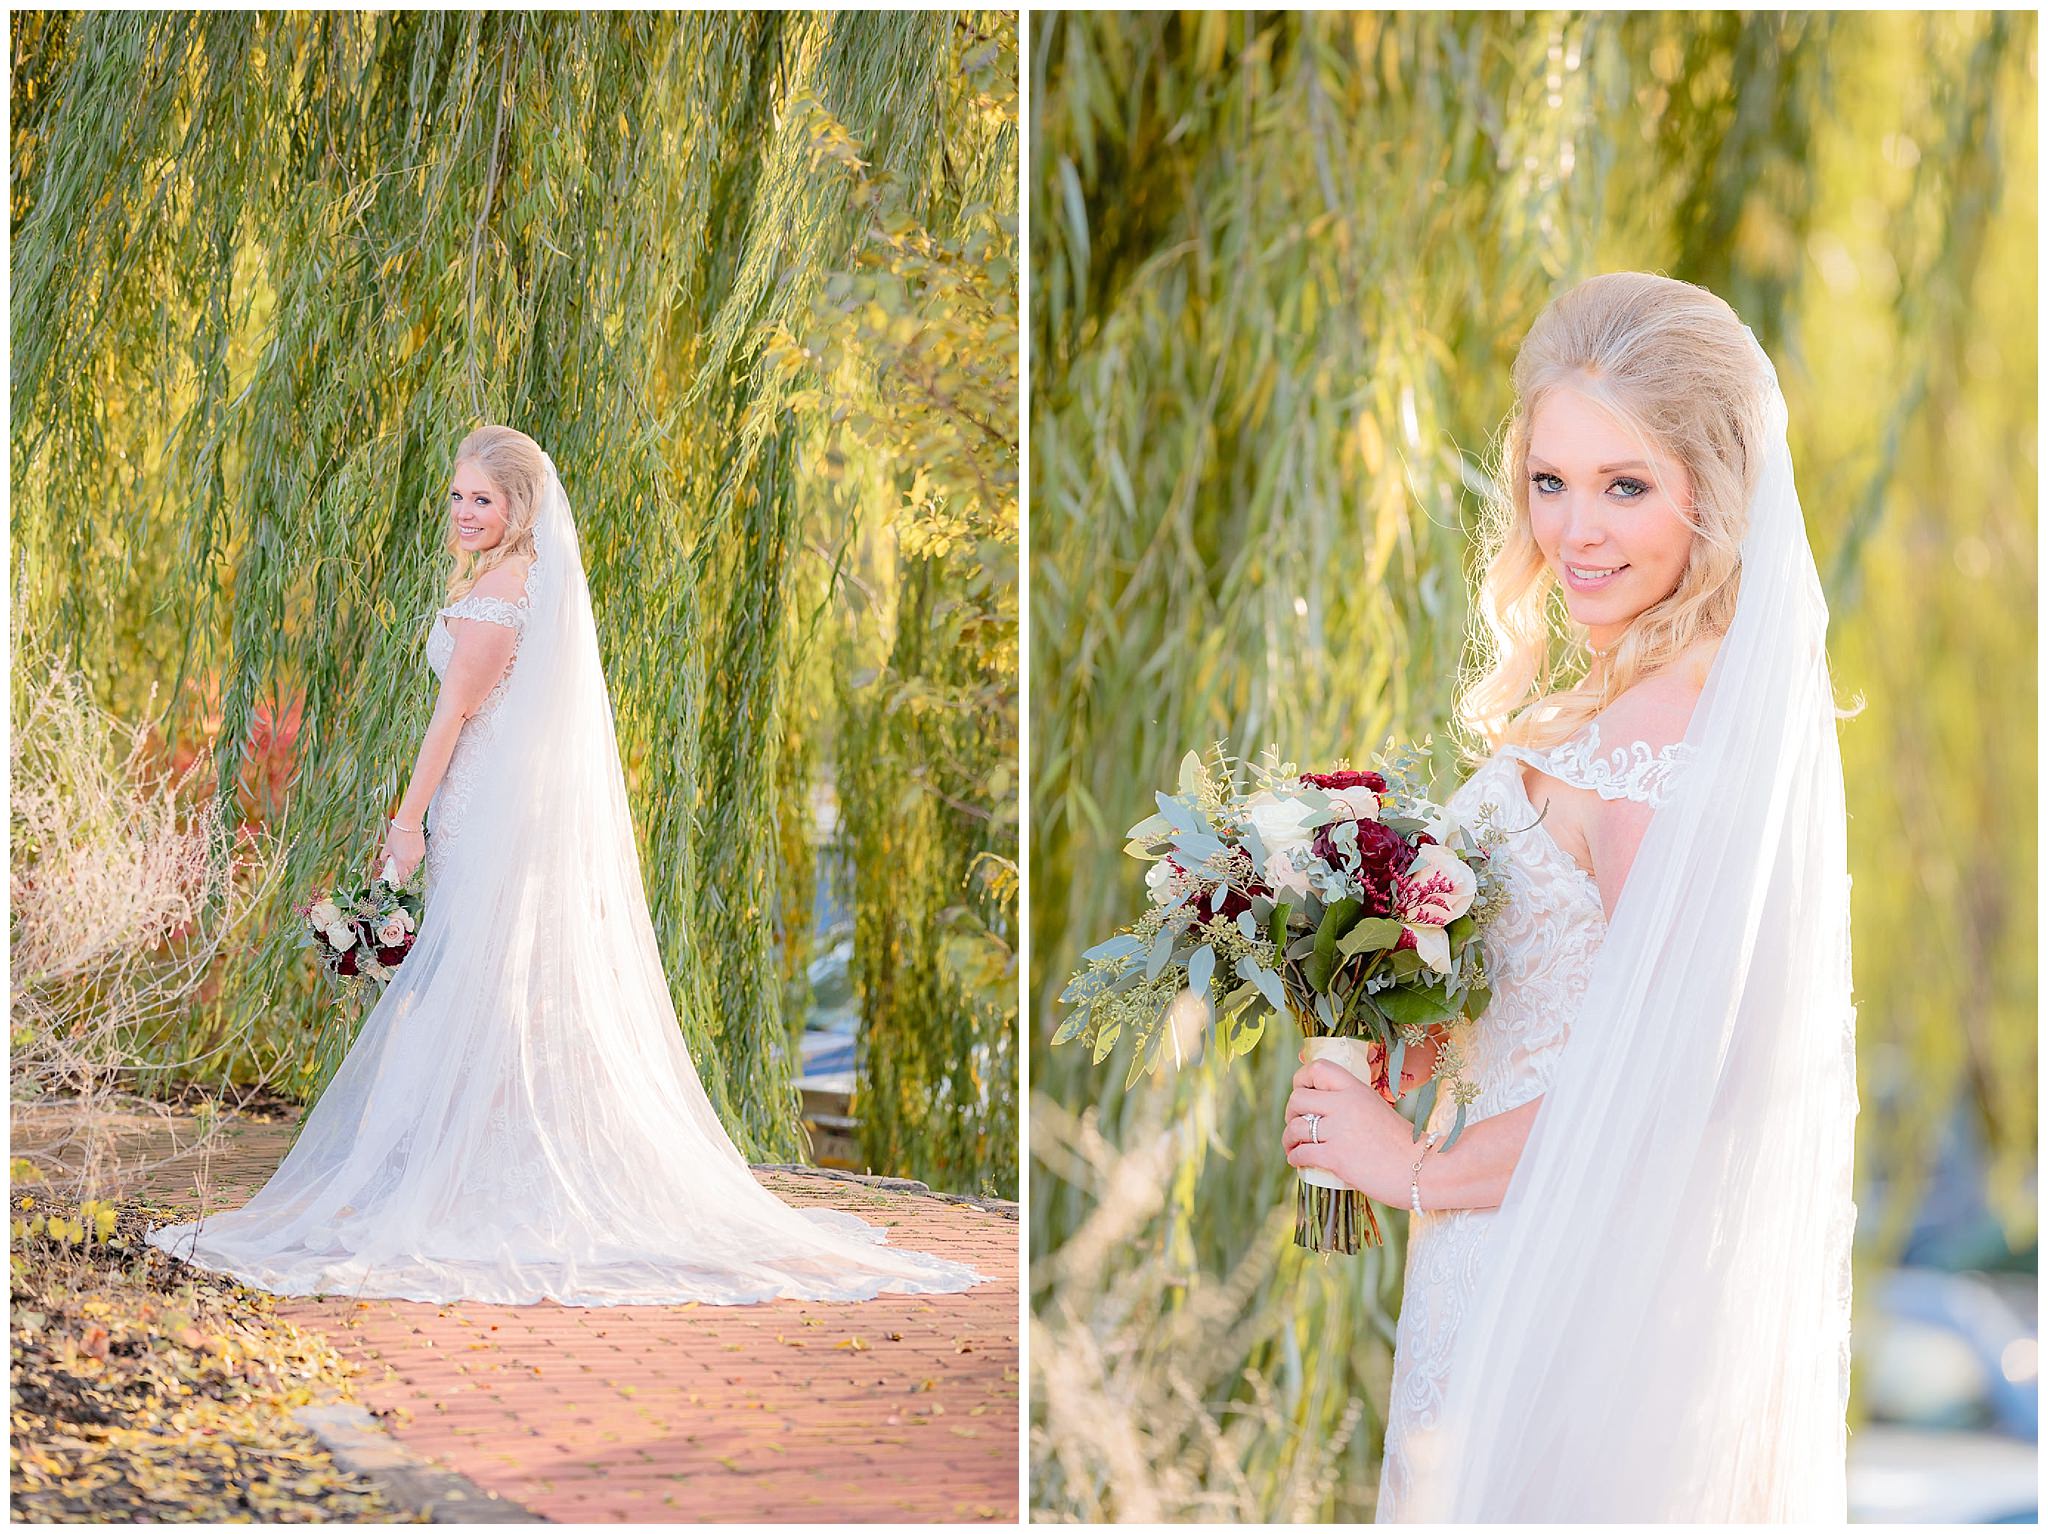 Bridal portraits during golden hour in front of a willow tree at Riverside Landing